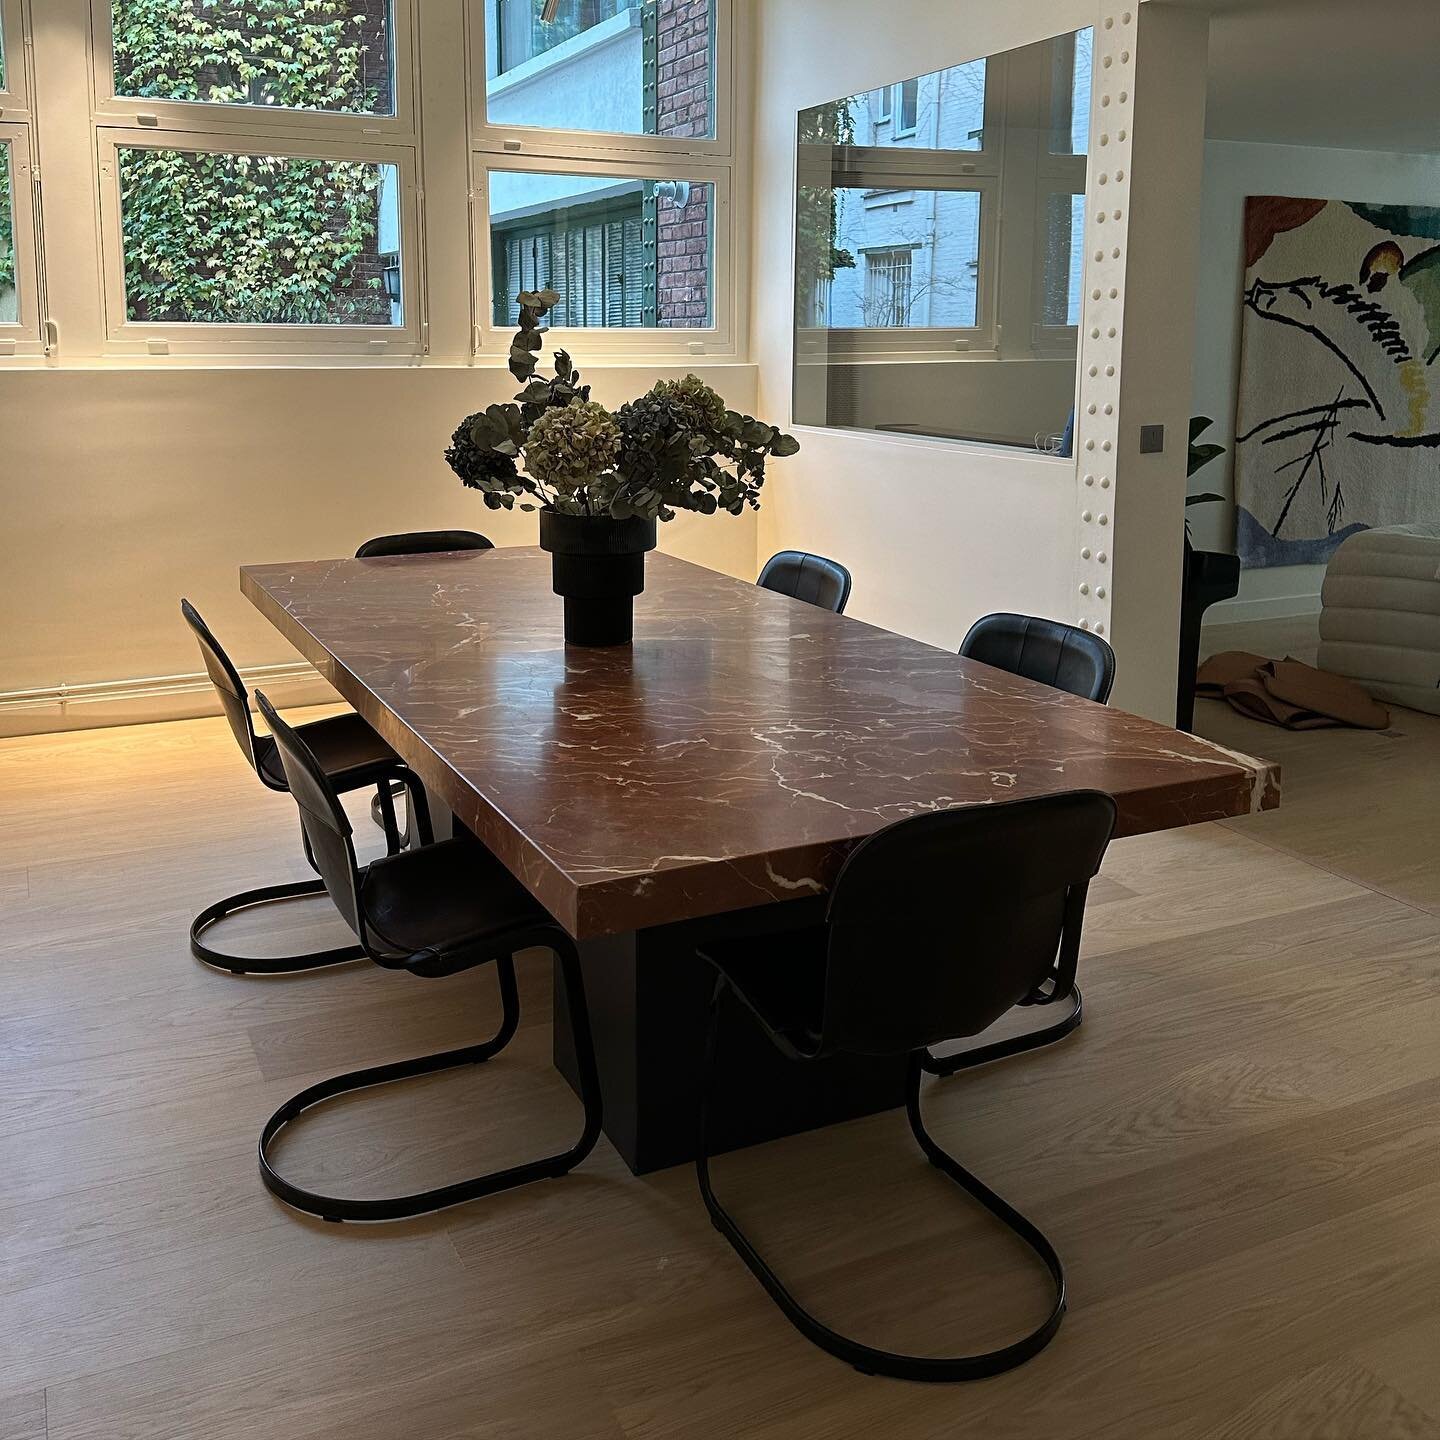 Our latest custom project is this oversized dining room table in Rosso Marbella marble for a private client&rsquo;s home in Paris. 

We are delighted to work with clients in making their marble design dreams come to life: considering shapes, proporti